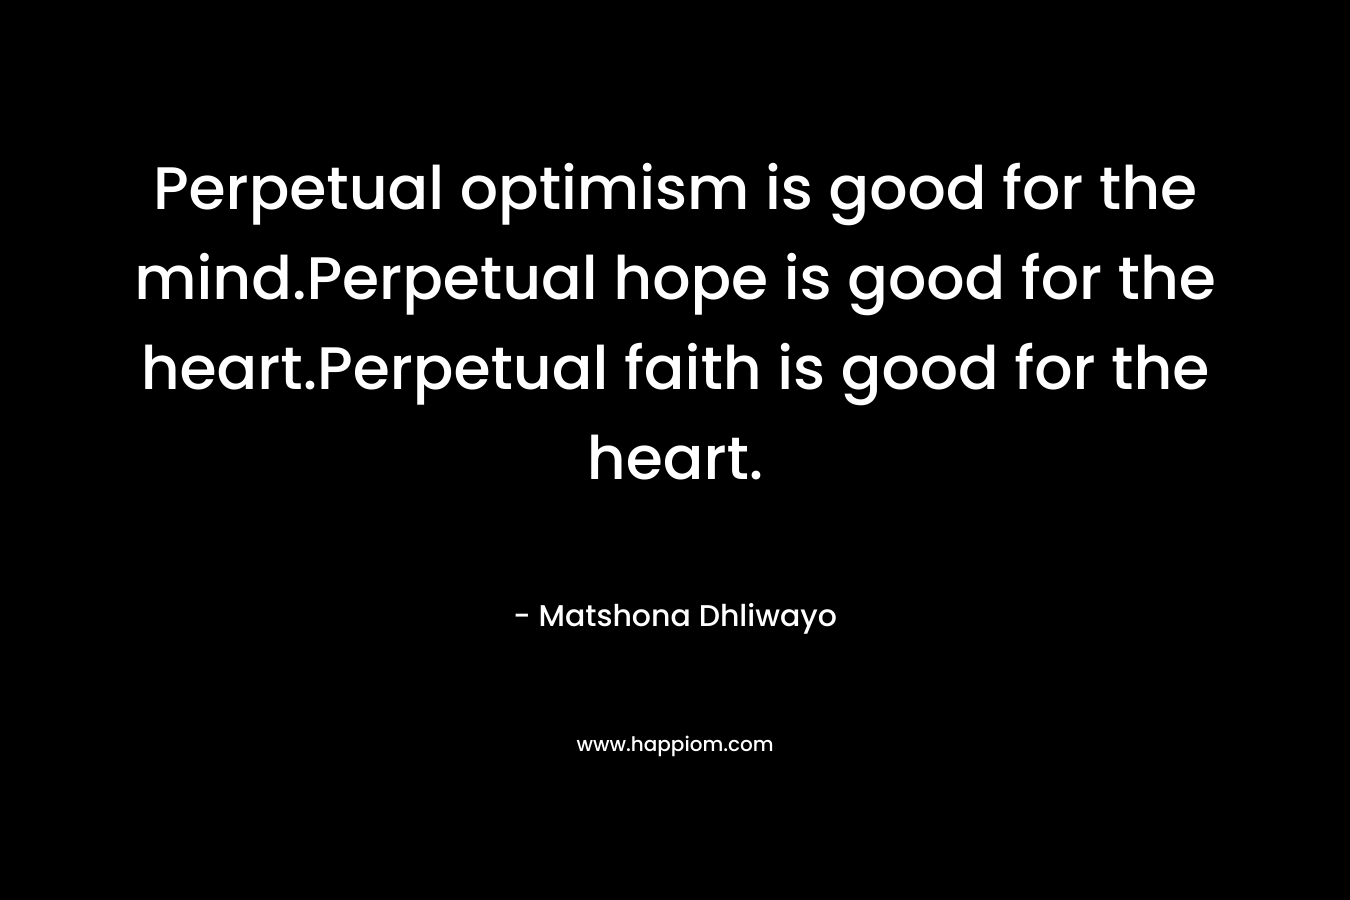 Perpetual optimism is good for the mind.Perpetual hope is good for the heart.Perpetual faith is good for the heart. – Matshona Dhliwayo